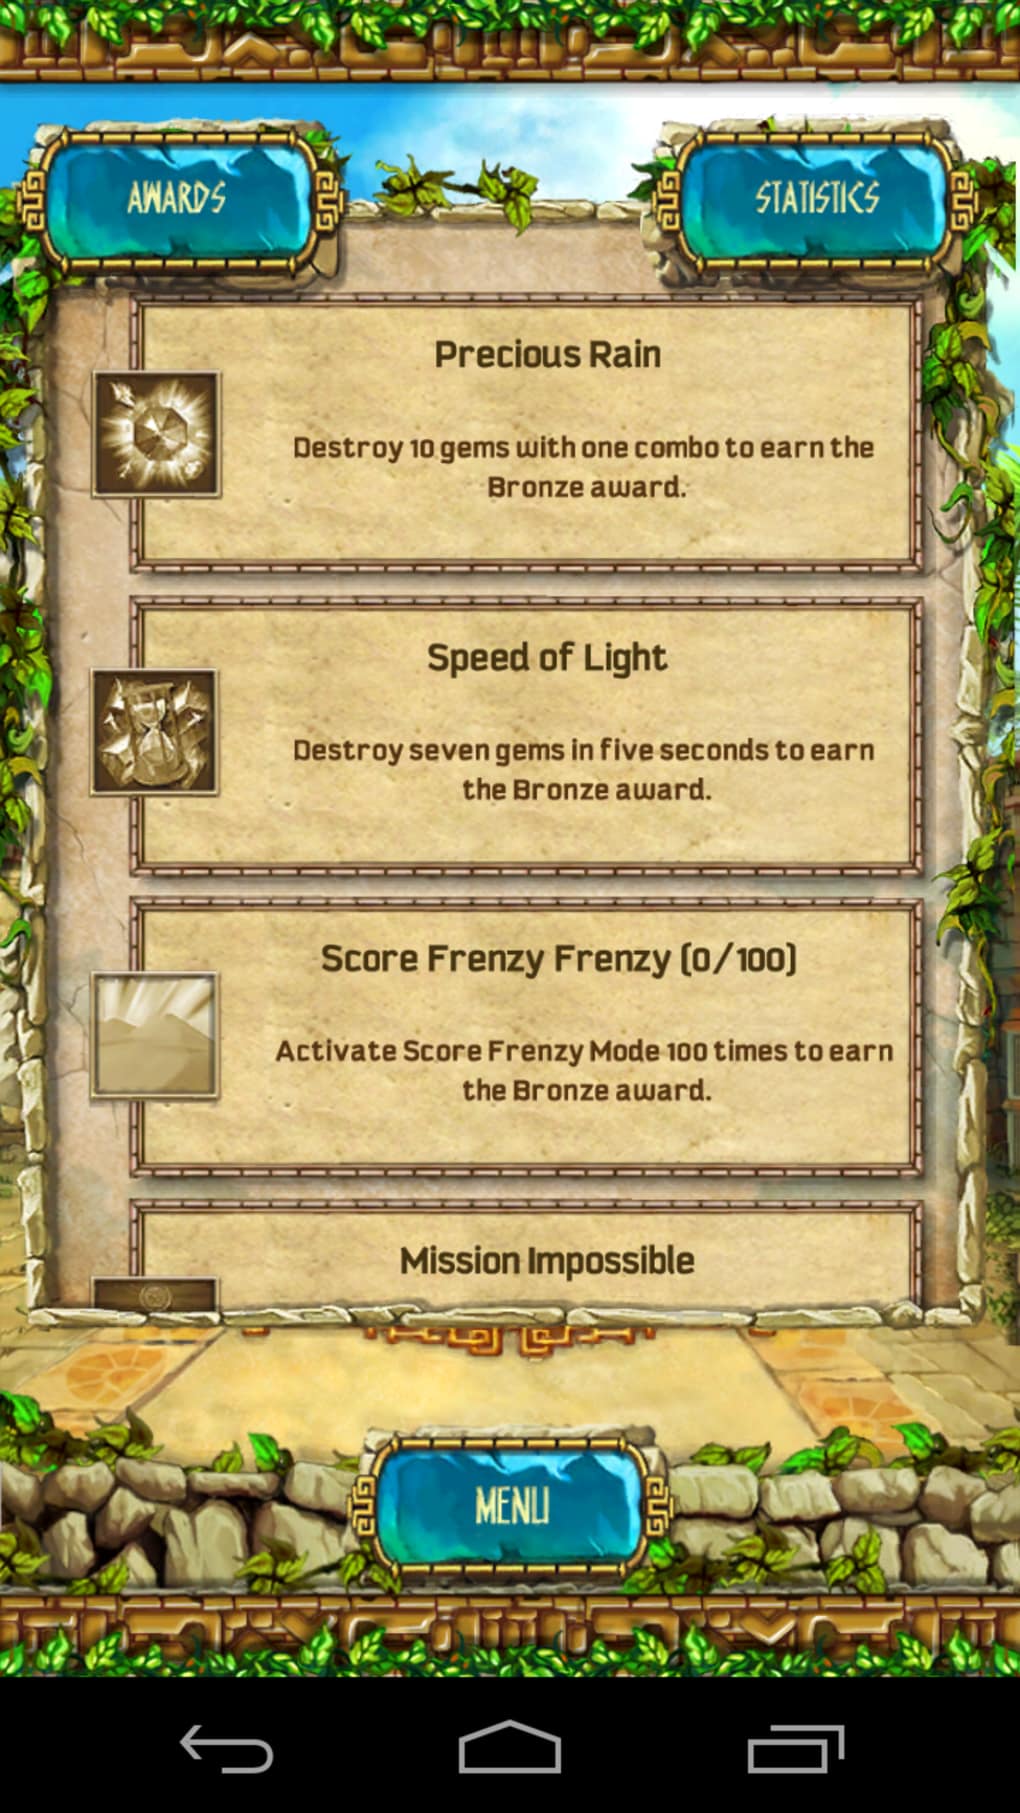 for android download The Treasures of Montezuma 3